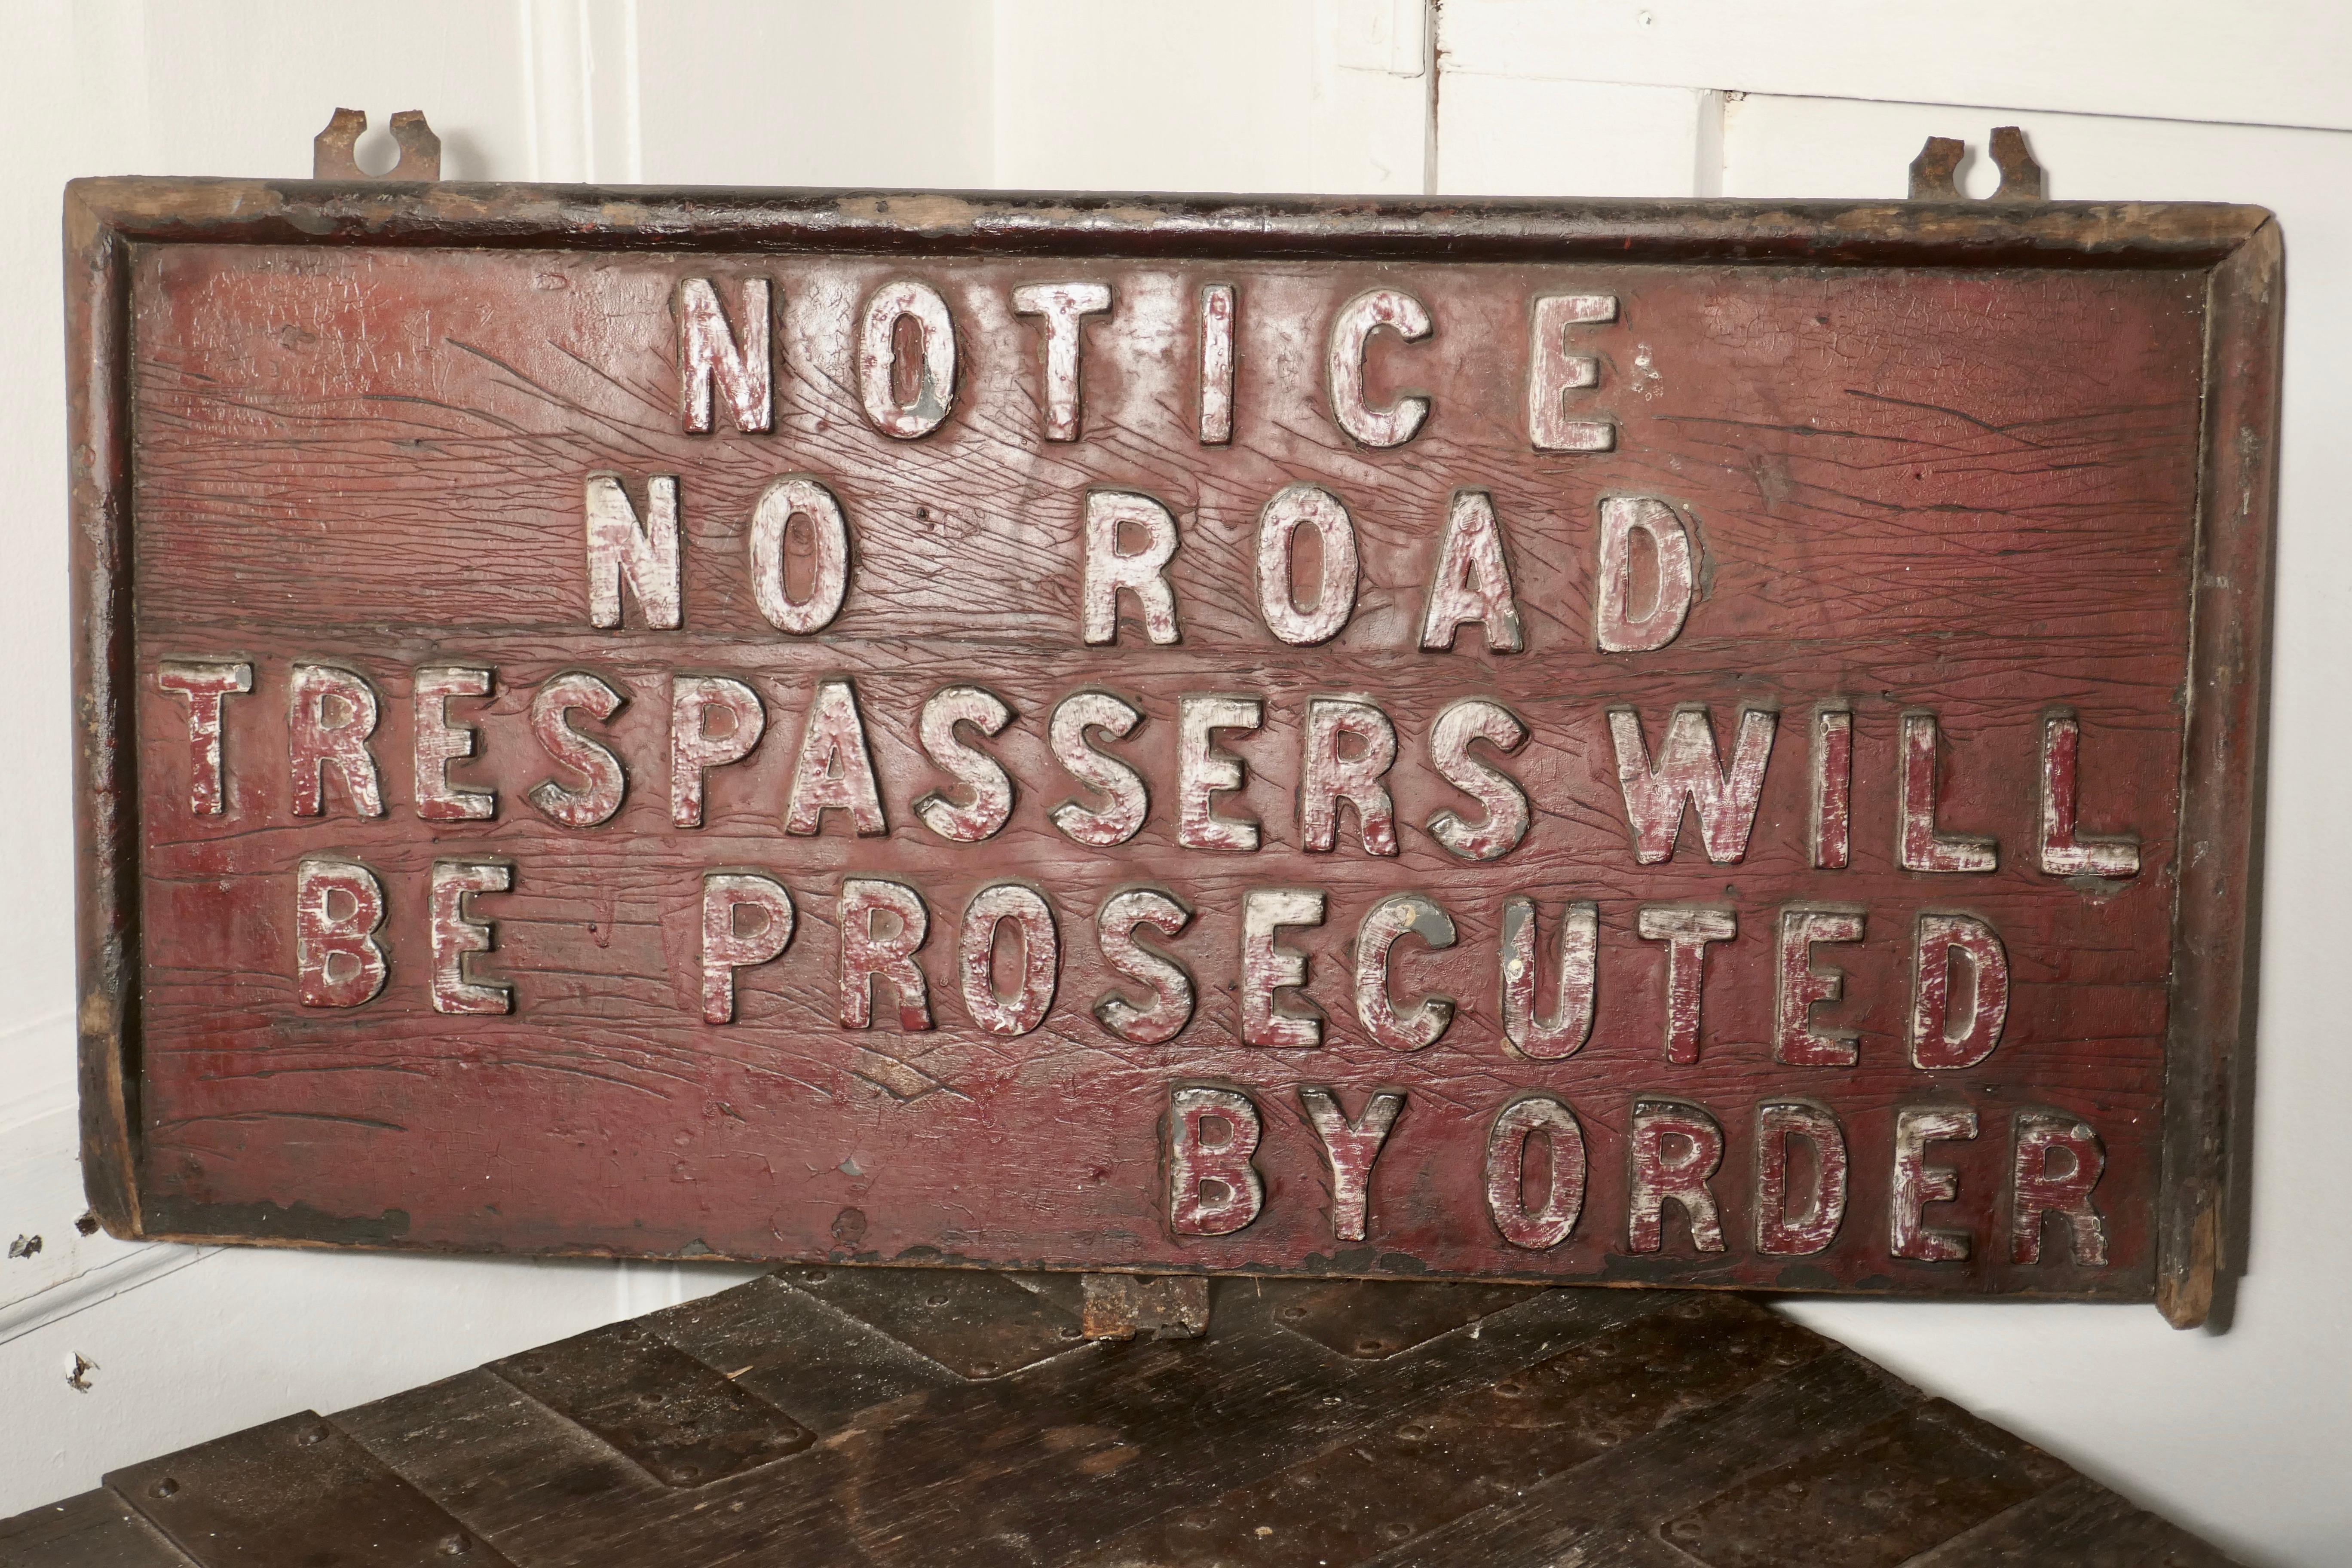 19th century rustic private land owners trespassers sign

This sign is made in elm with metal lettering set in relief it says

Notice
No road
Trespassers Wil
Be prosecuted
By order

The sign is in sound weathered condition, it is 13” high,